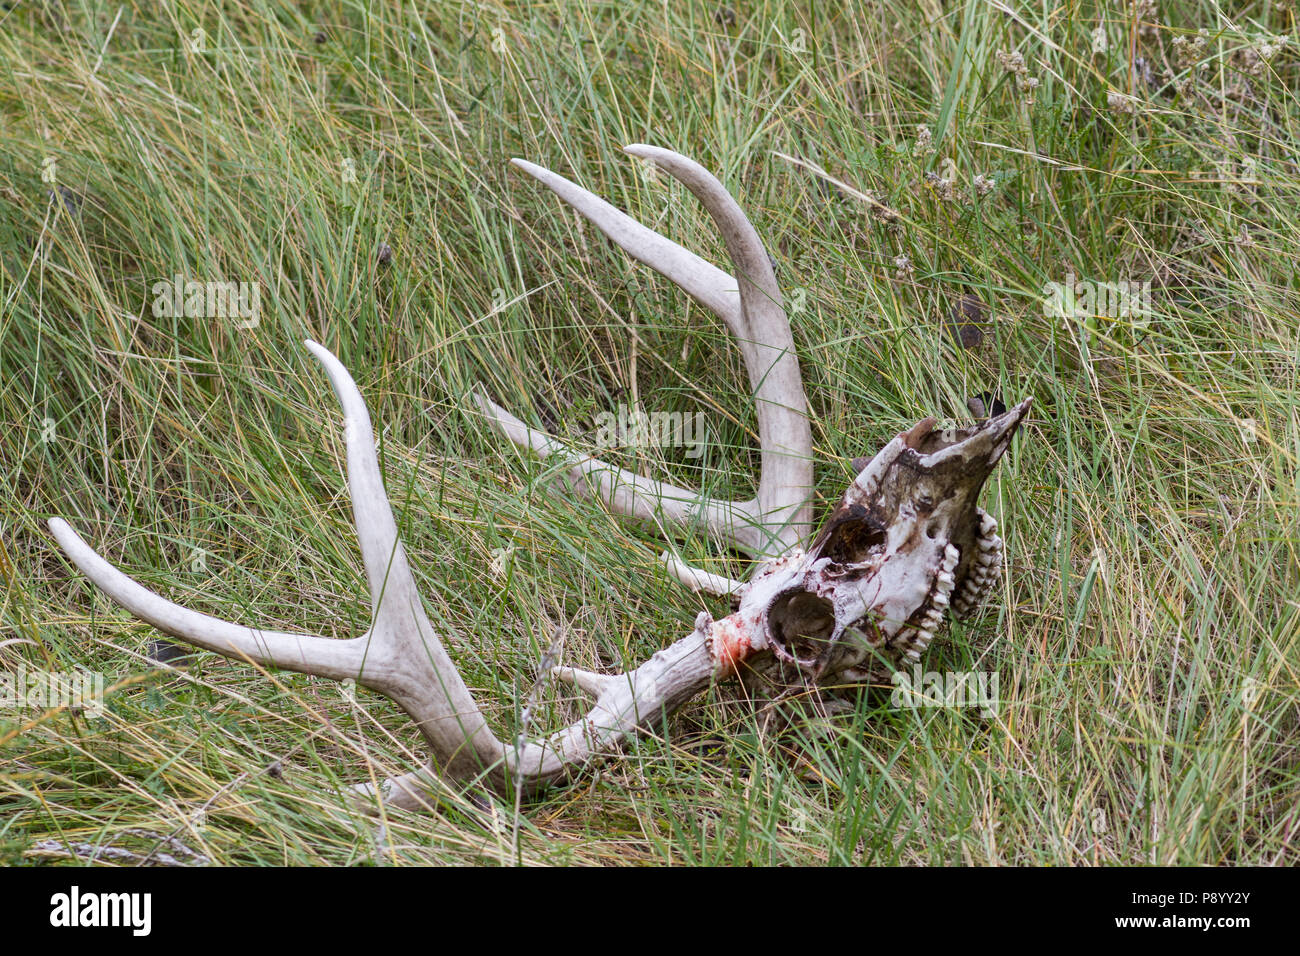 Mule deer, Odocoileus hemionus, skull and antlers; remains of a recent mountain lion kill. Stock Photo